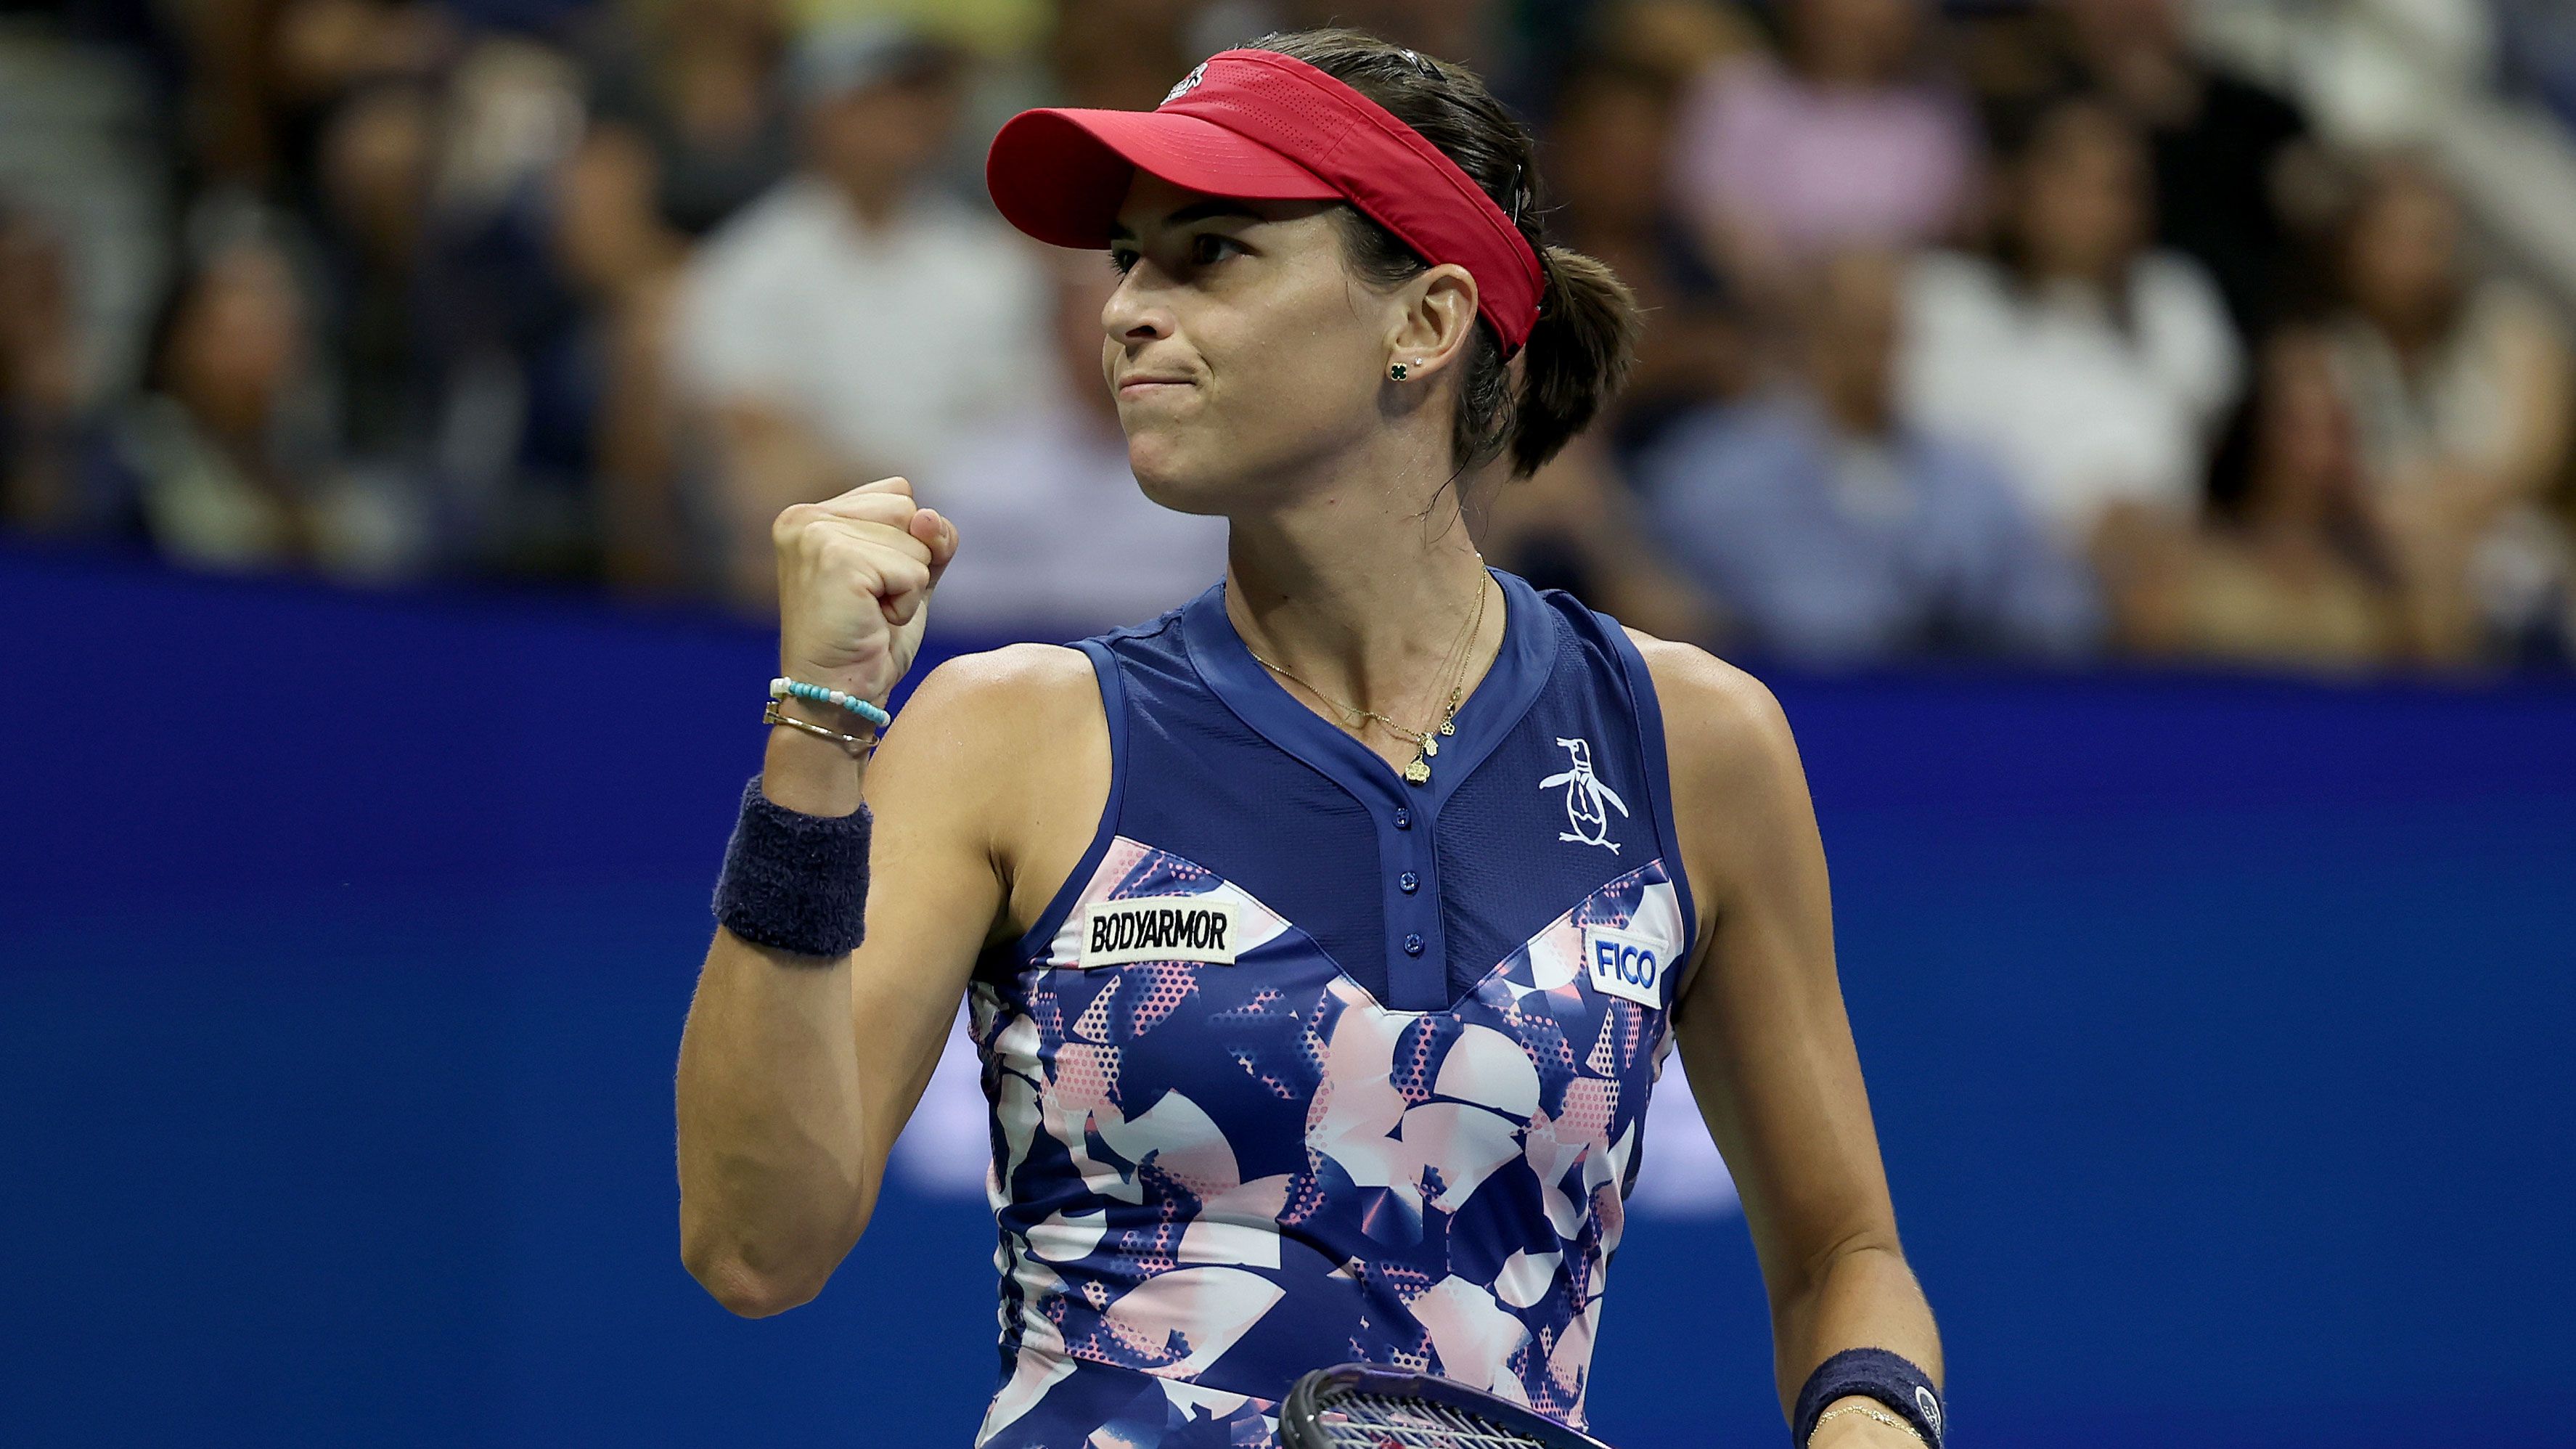 EXCLUSIVE: Why Ajla Tomljanovic 'has got the game' to go all the way at the US Open